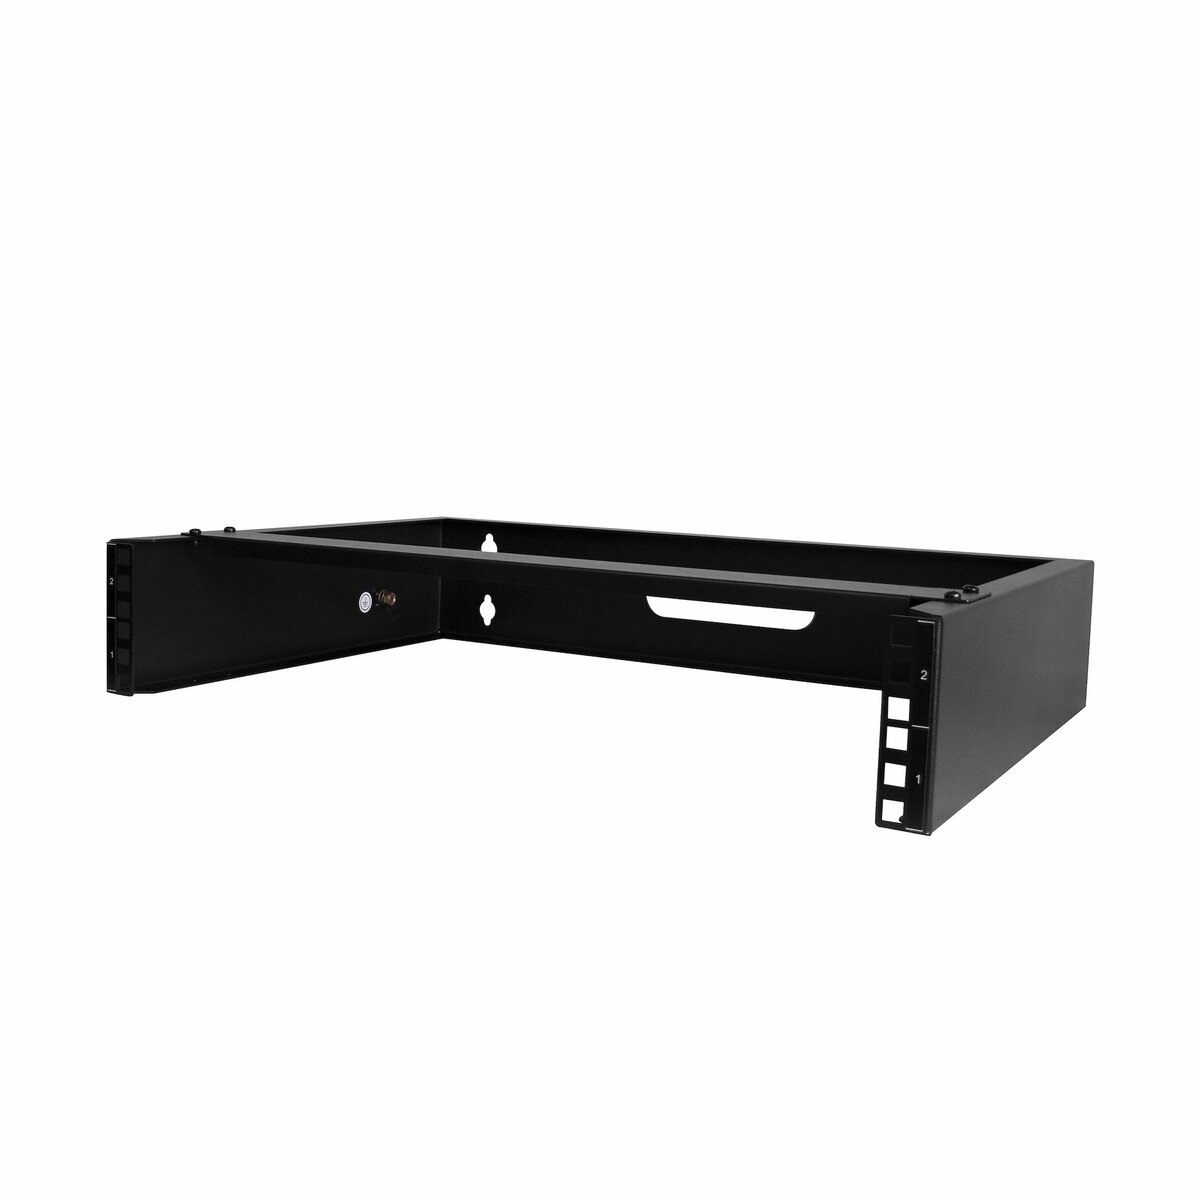 StarTech.com 2U Wall Mount Rack - 19 Wall Mount Network Rack - 14 inch  Deep (Low Profile) - Wall Mounting Patch Panel Bracket for Network Switches  - IT Equipment - 77lb (35kg)